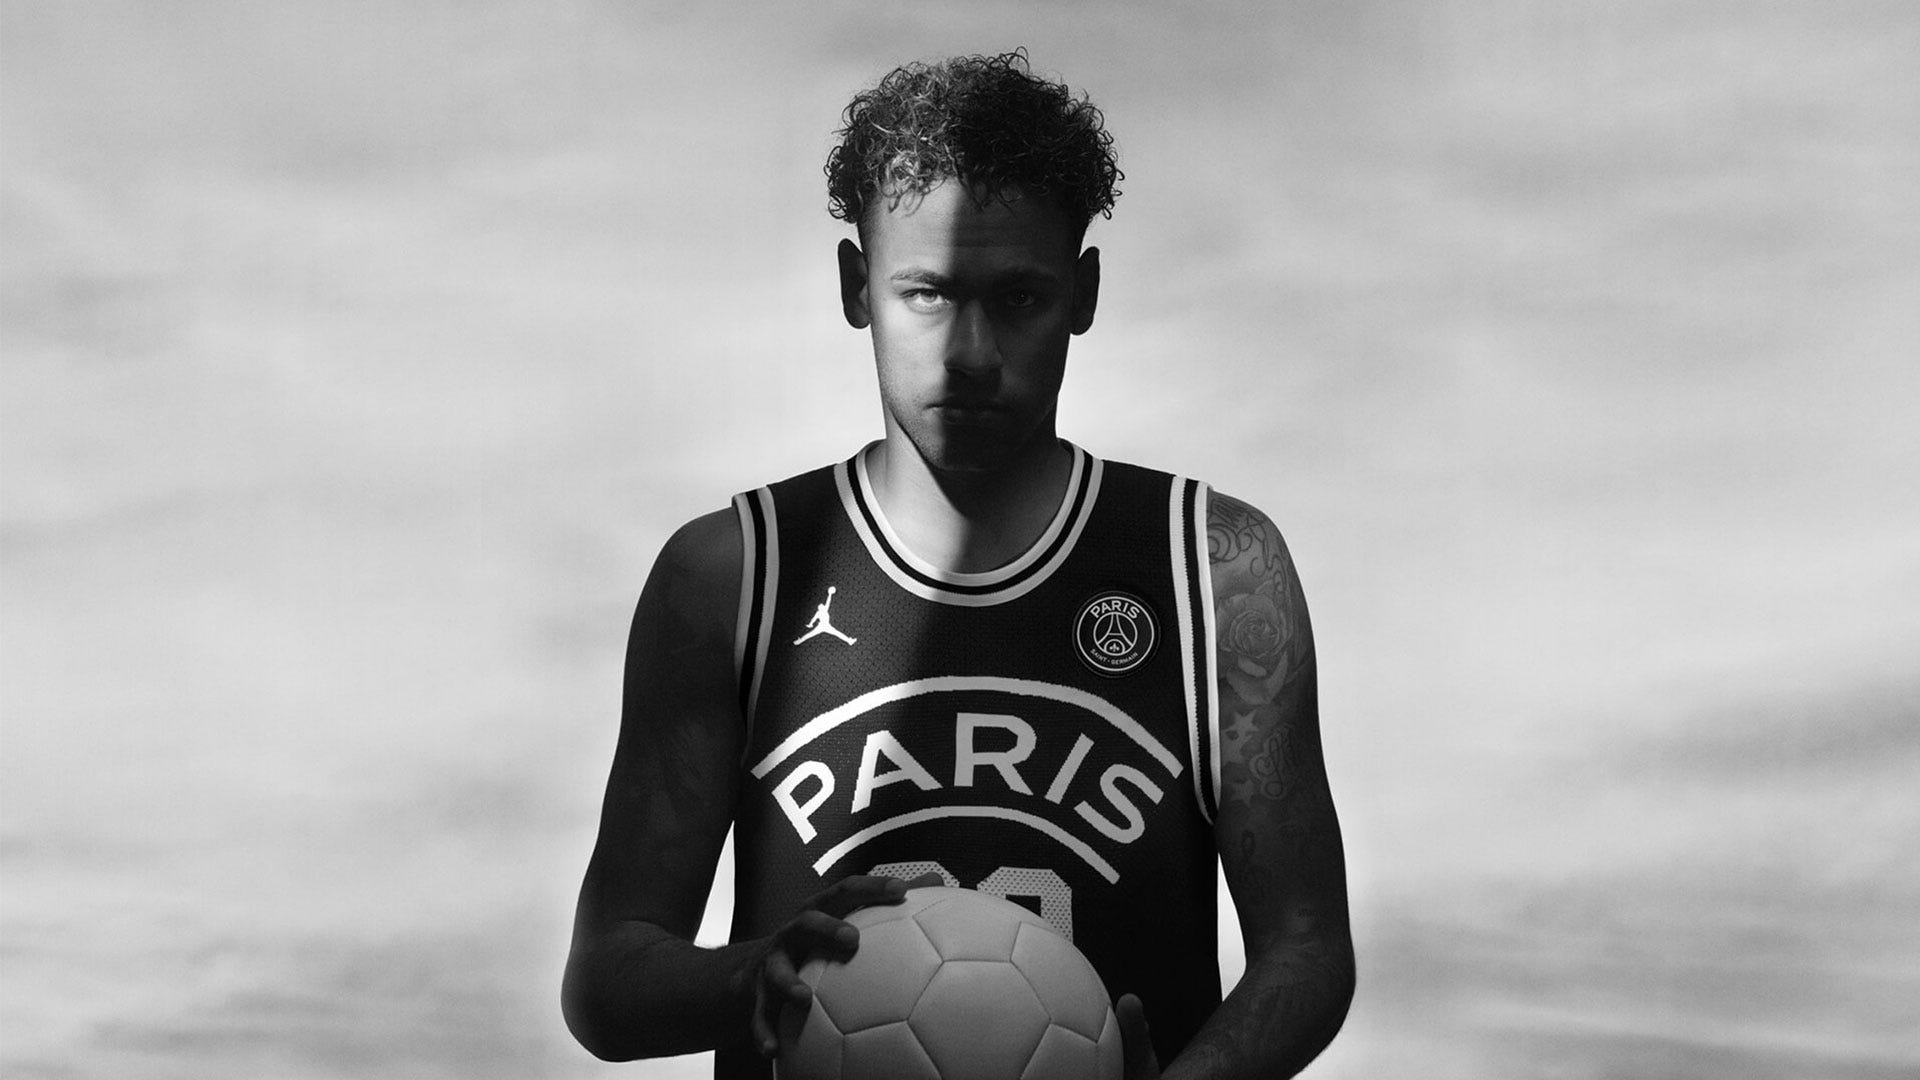 Psg X Jordan Juventus X Palace Skateboards And The Best Fashion And Football Crossovers Goal Com Uk